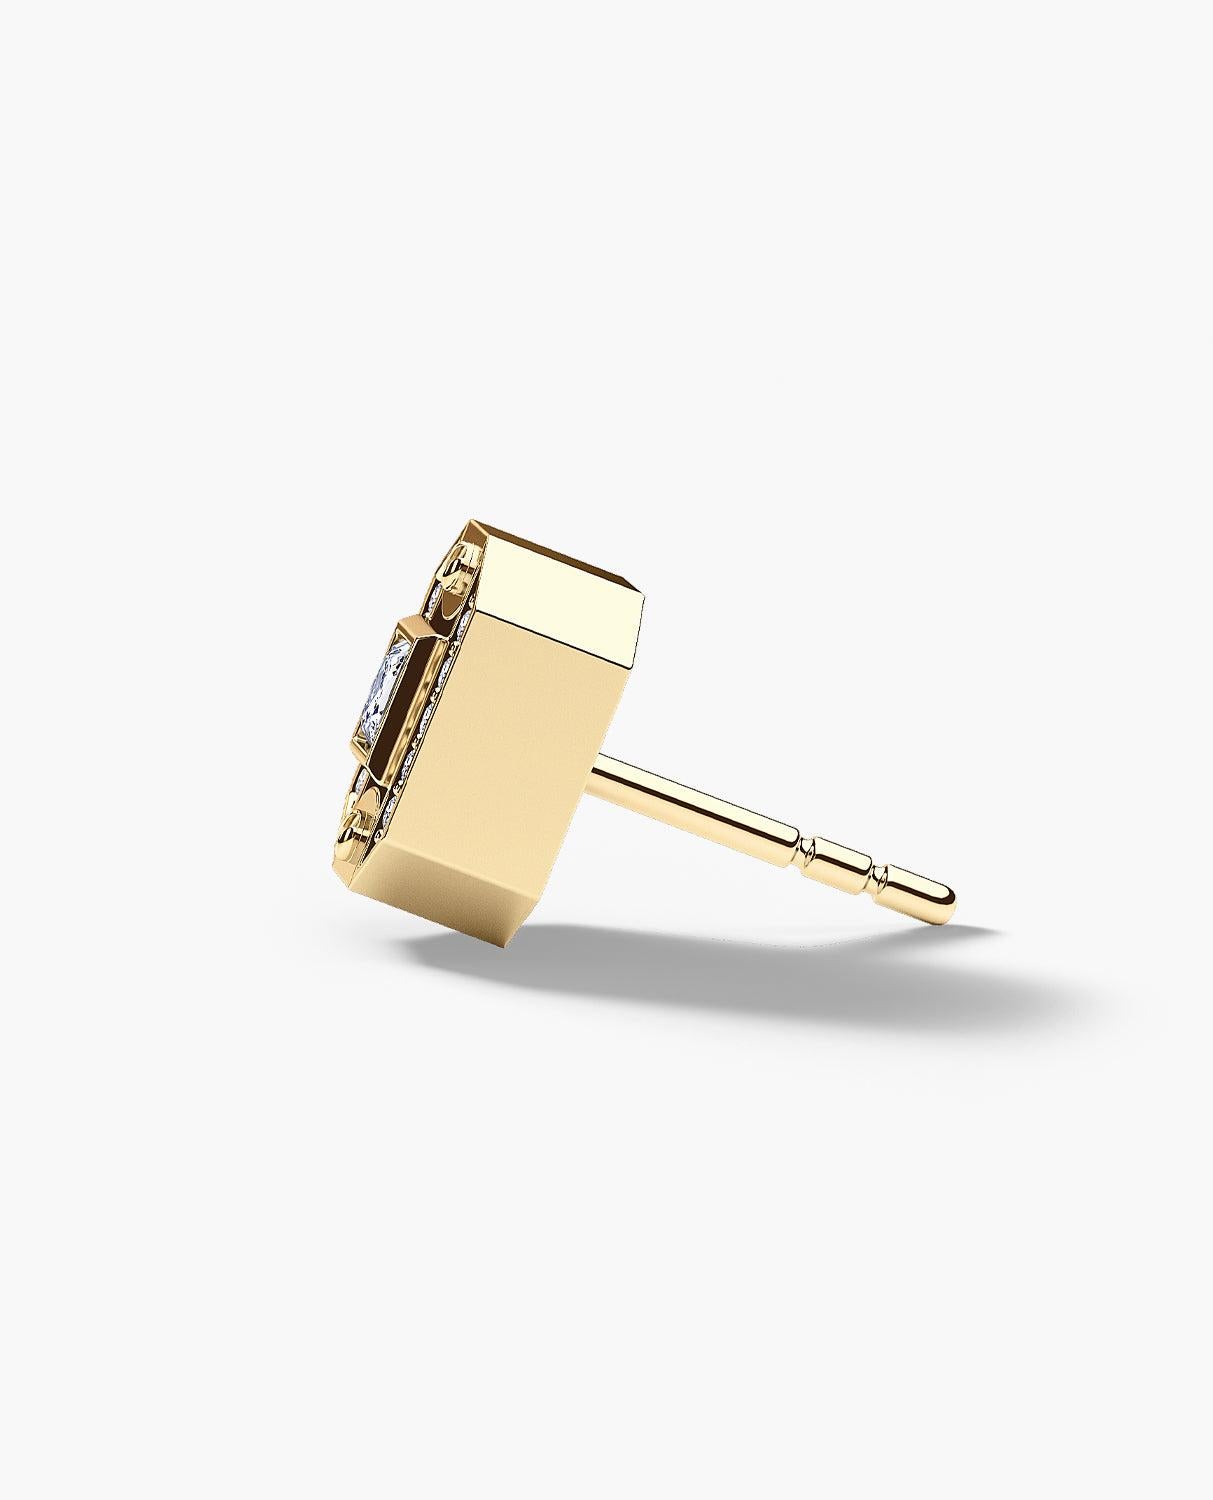 Iconic BRIGGS Gold Single Stud Earring with 0.18ct Diamonds. Rockford stud earrings are available with white diamonds in gold. Ready to Ship earrings are pre-produced, unworn pieces. This earring have a short turn-around time of only 1-2 business